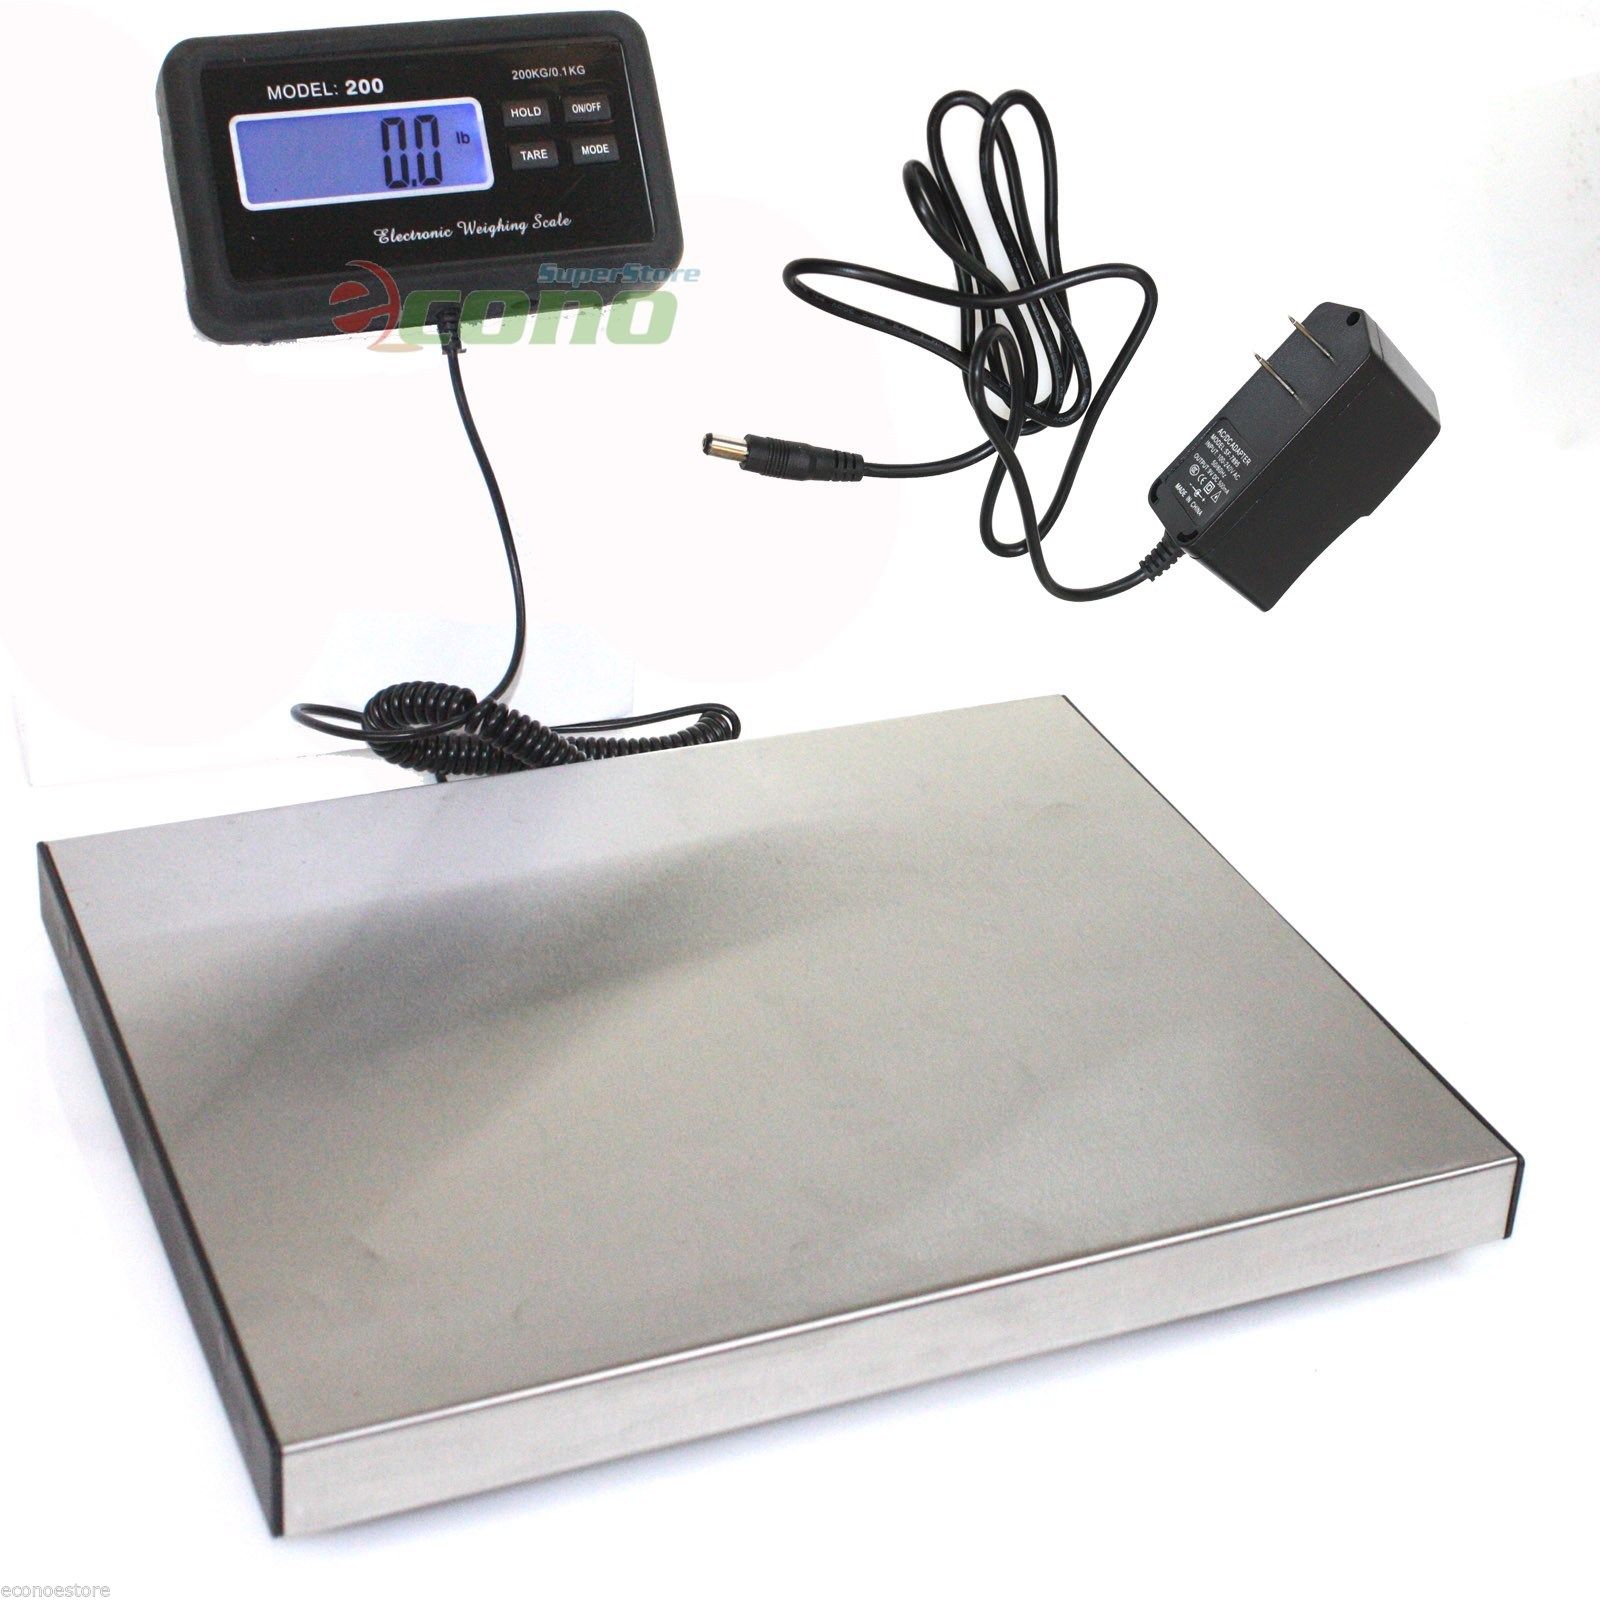 LARGE 440LB DOG DIGITAL PET WEIGHING SCALE for Shipping Veterinary  Livestock